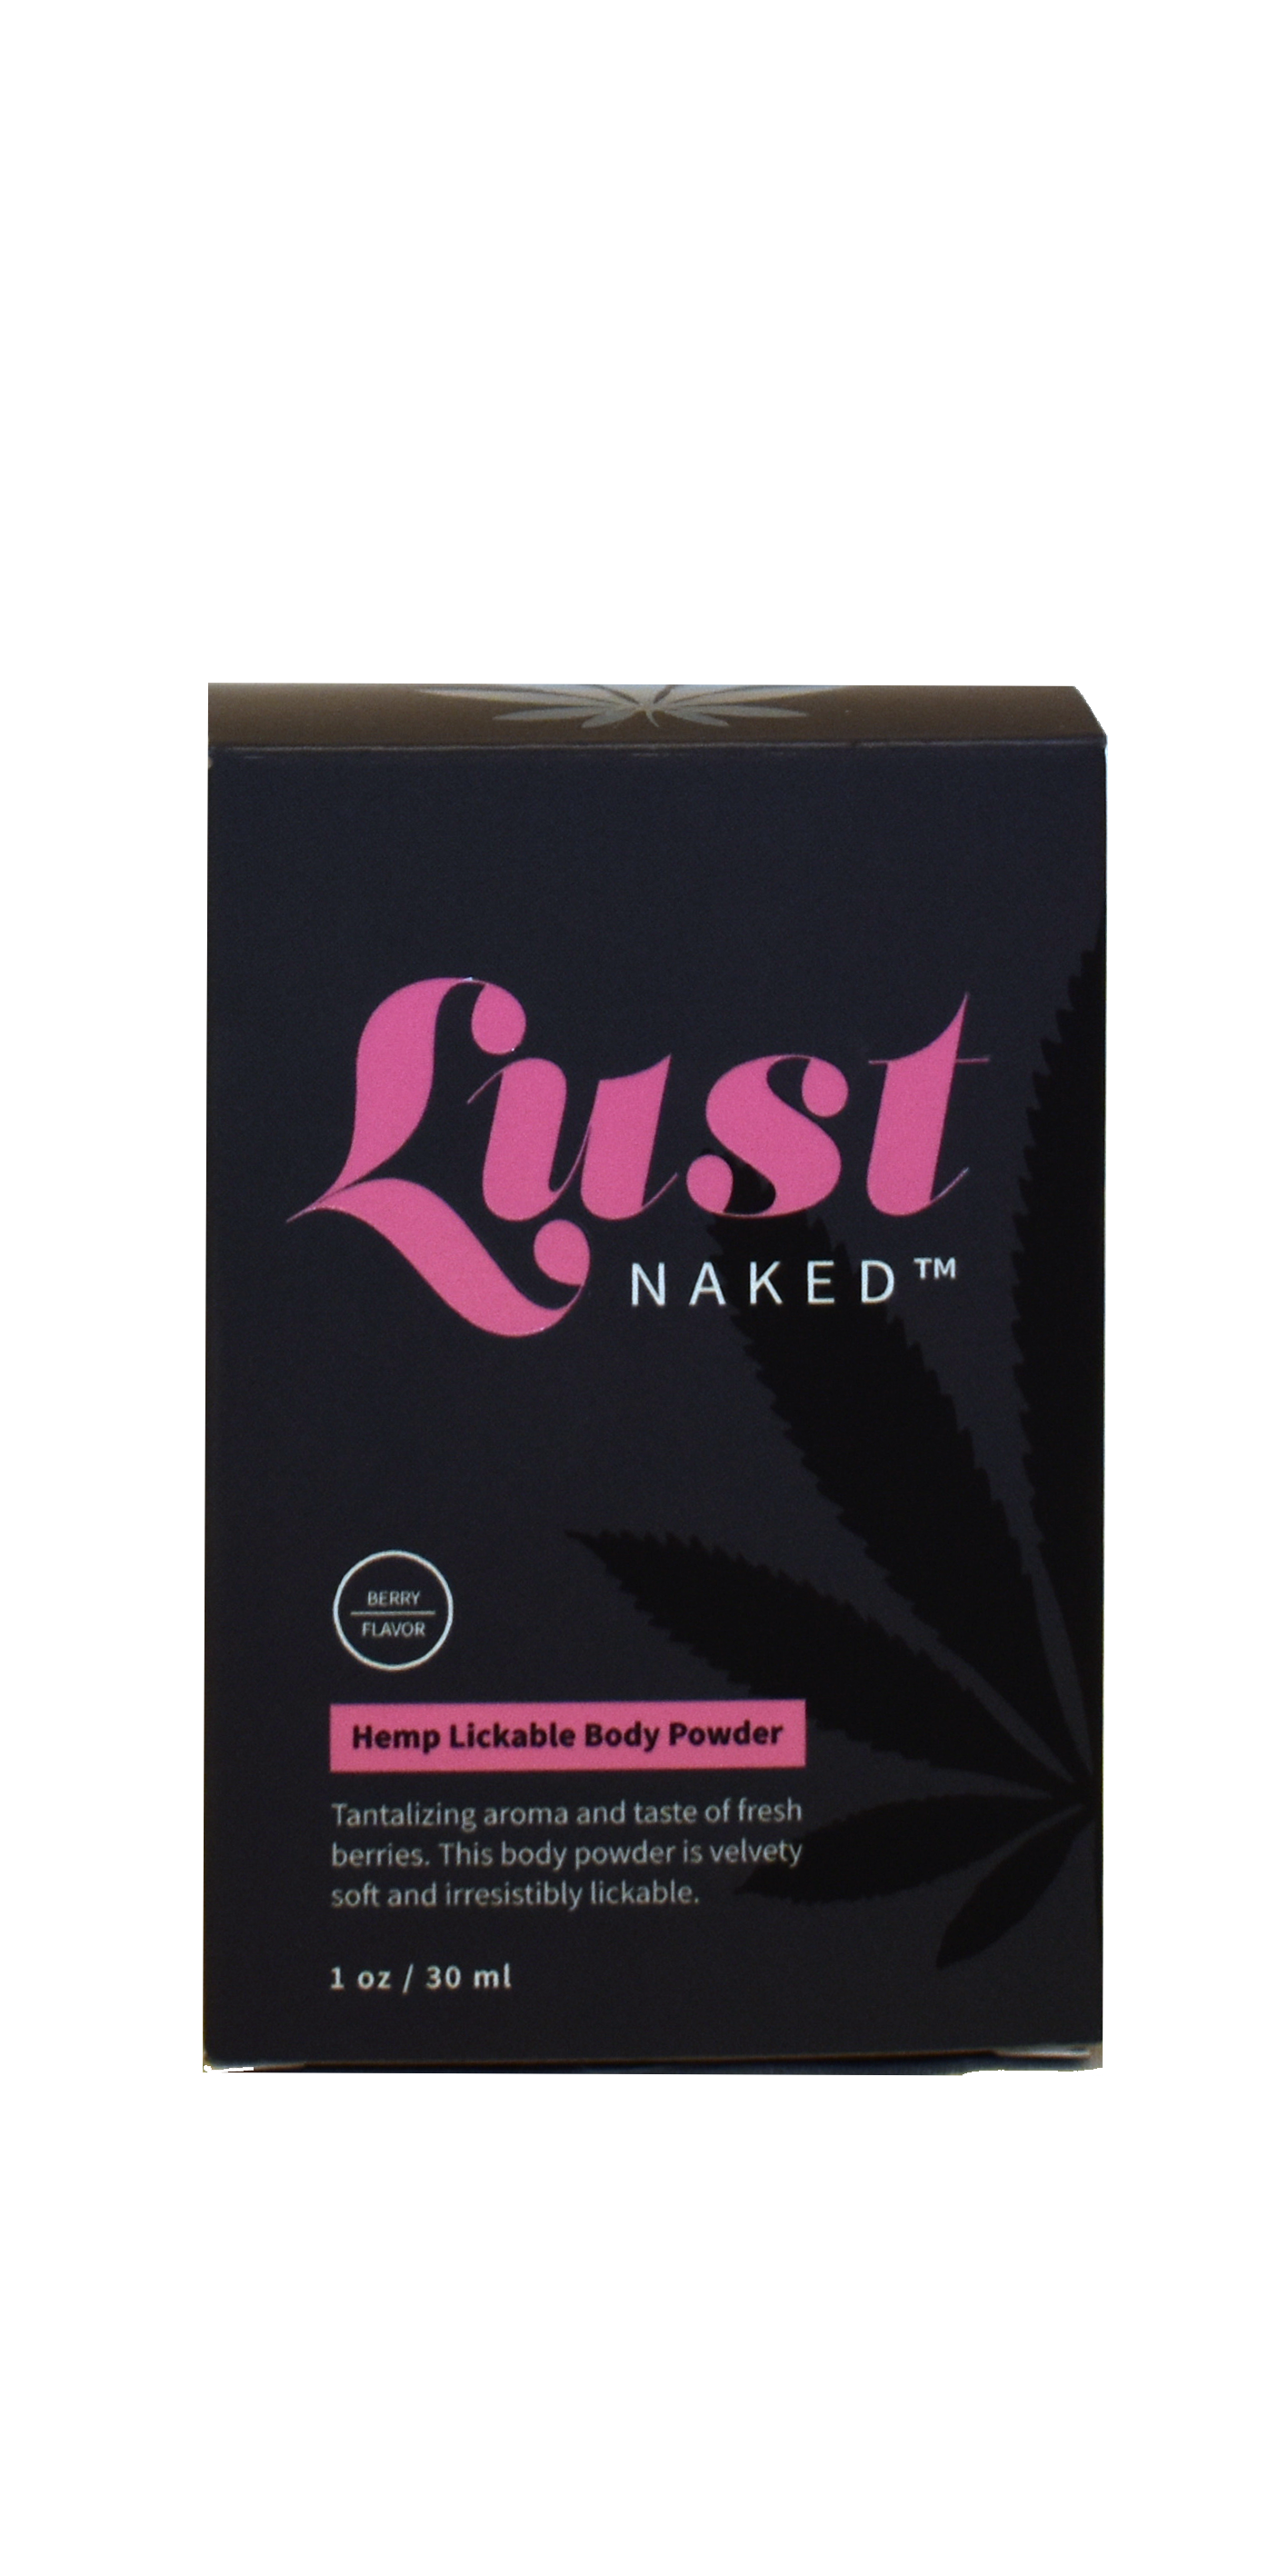 Hemp Lickable Body Powder with Body Duster-image